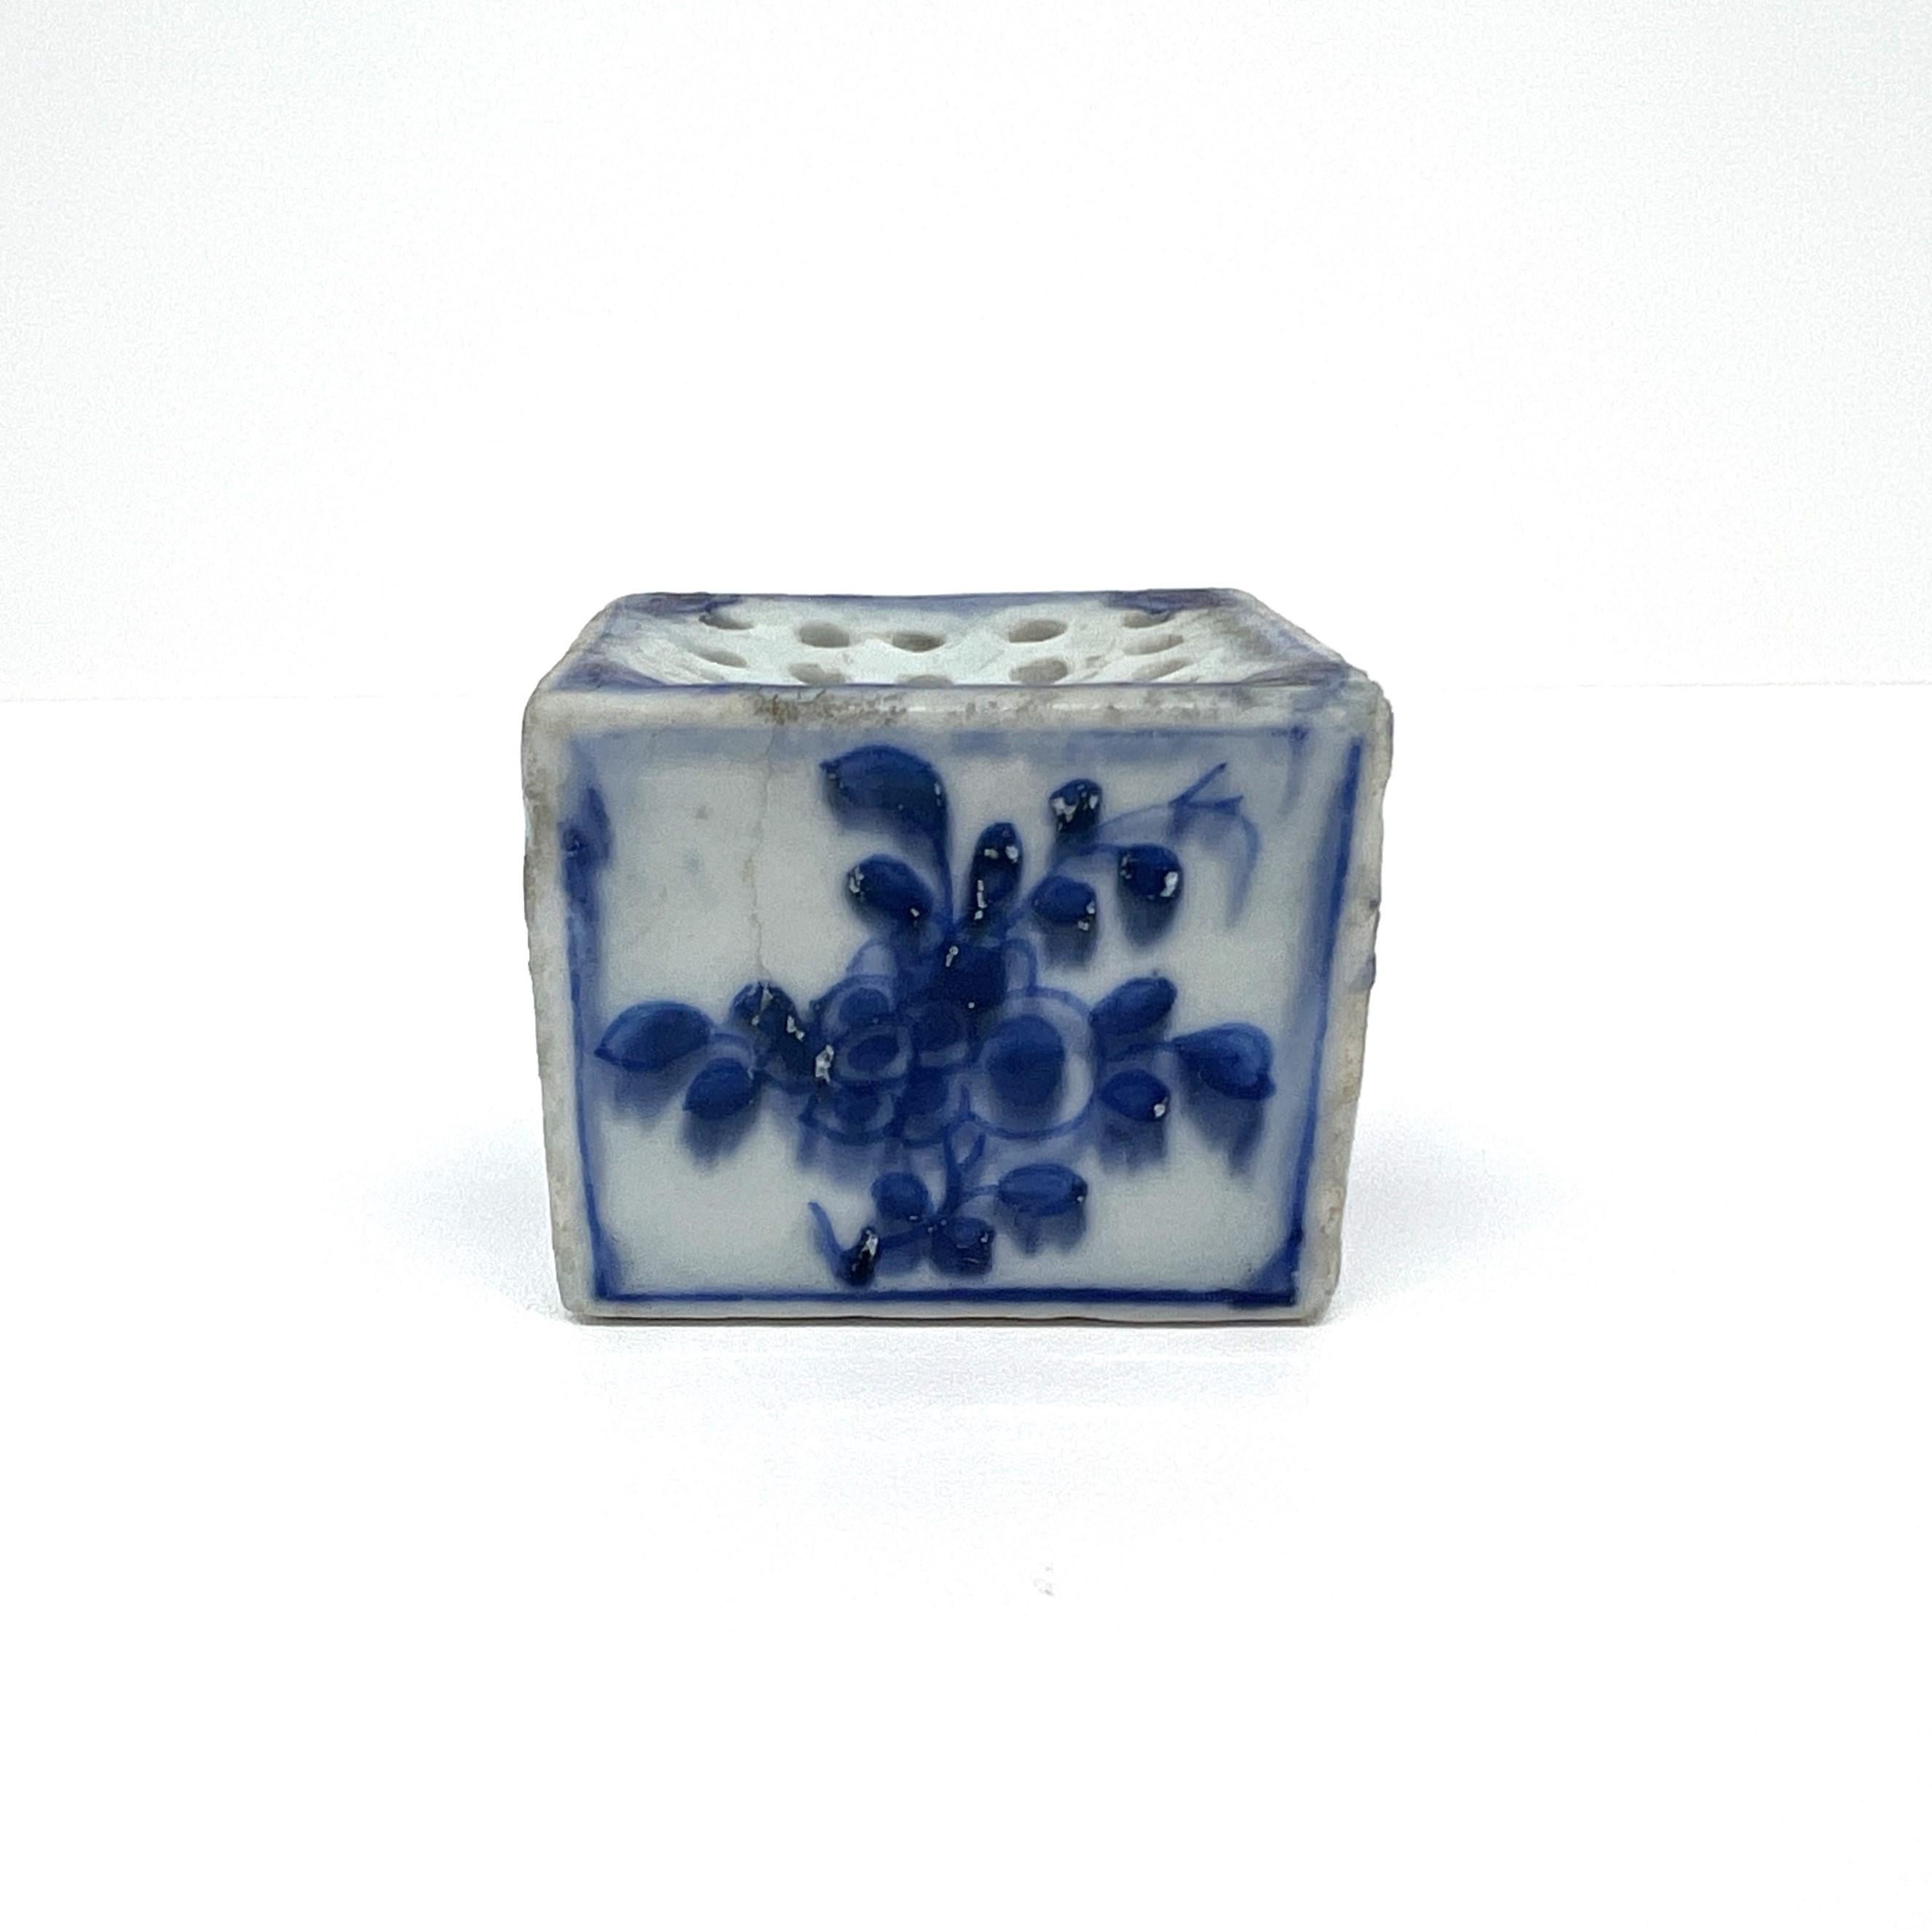 This cute square box could have been used as an incense burner, and flowers could have been inserted one by one.

Period : Qing Dynasty, Yongzheng Period
Production Date : C 1725
Made in : Jingdezhen
Destination : Netherland
Found/Acquired :